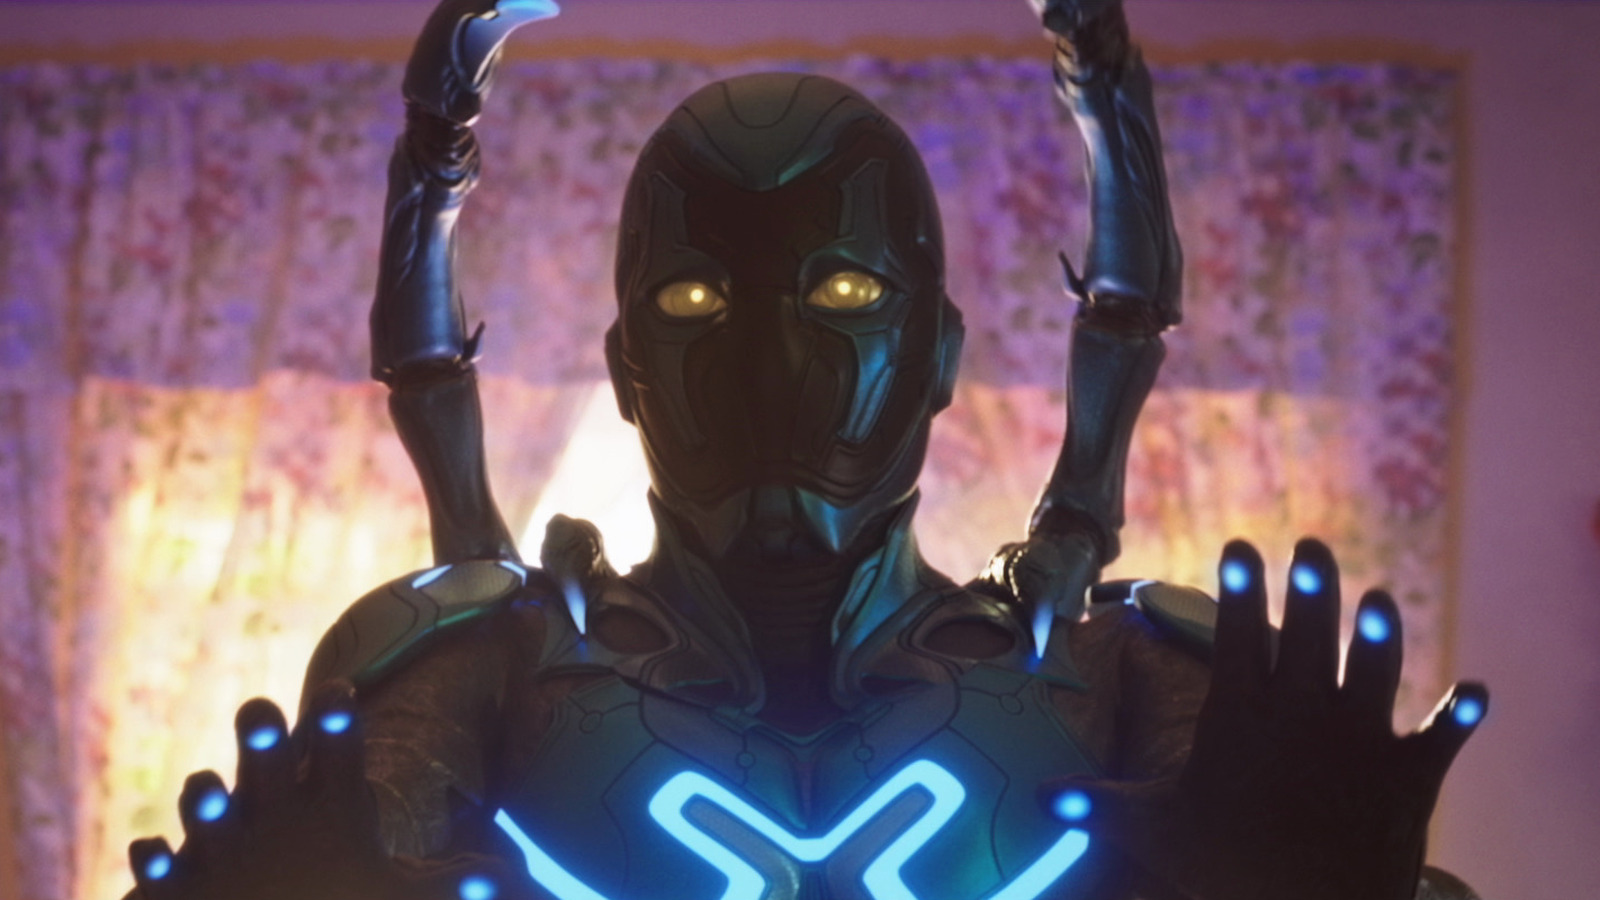 Even though it's really good, DC's Blue Beetle faces an uphill battle at the box office